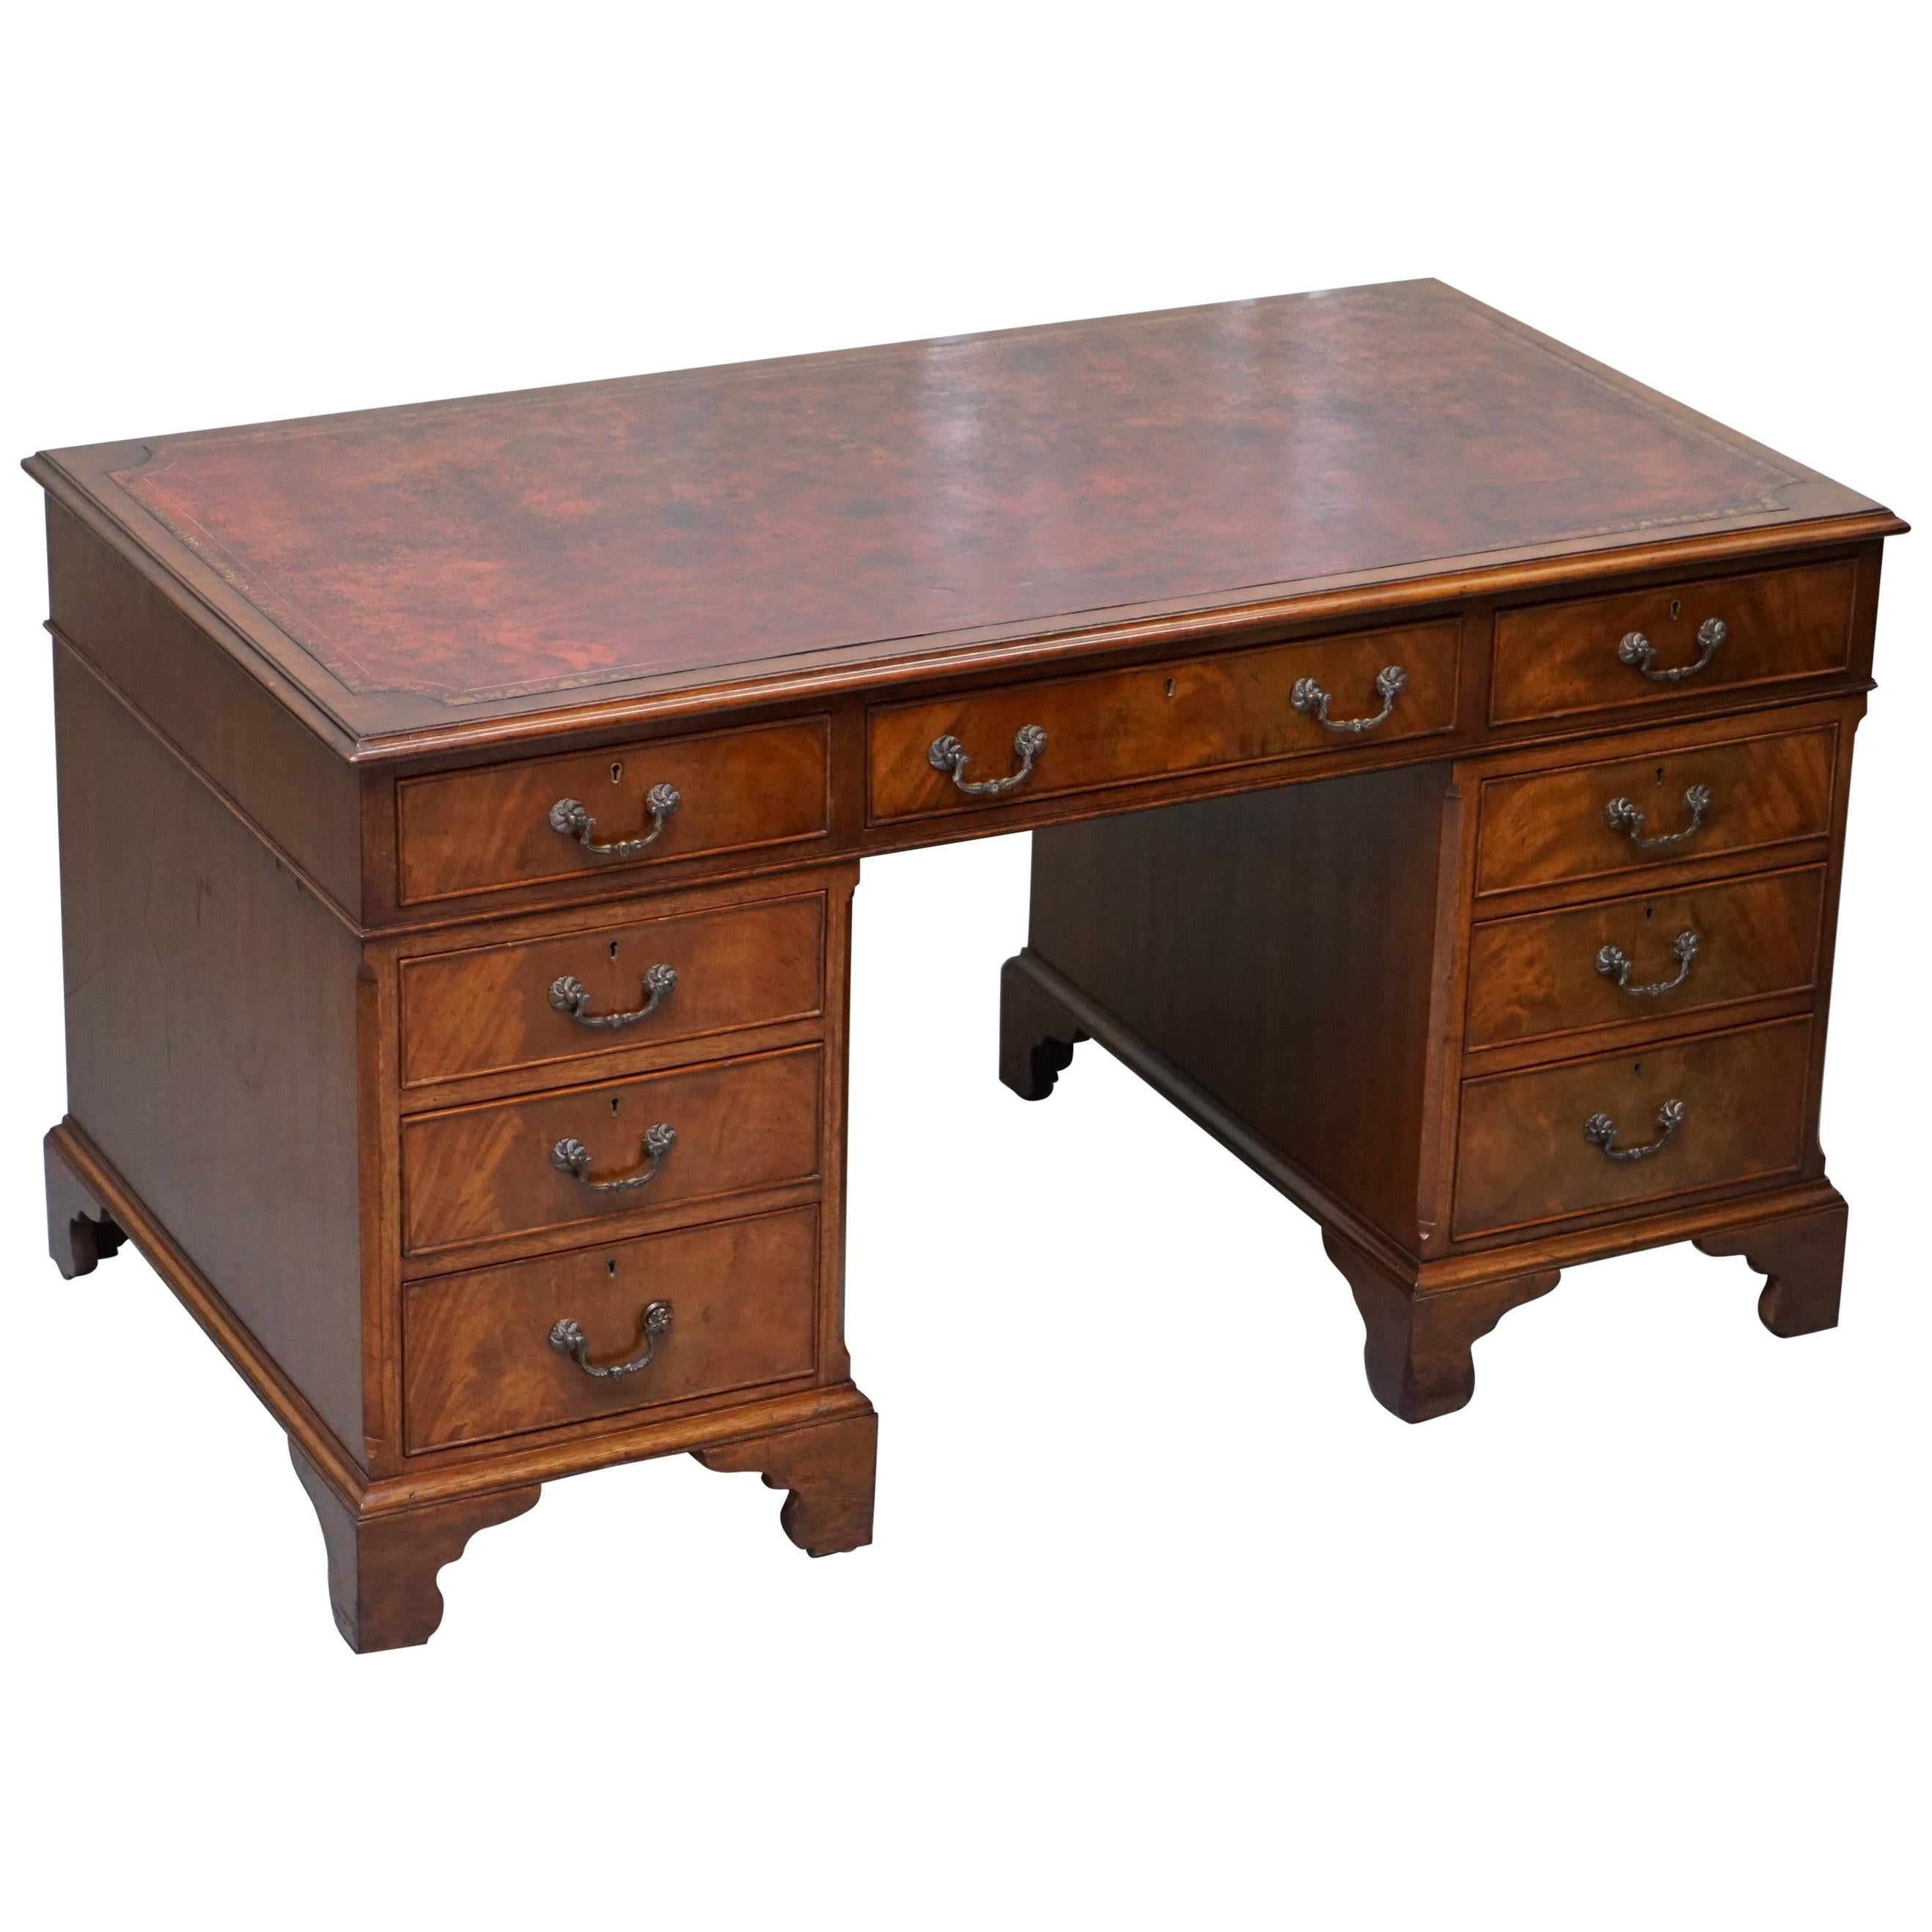 Victorian circa 1870 Twin Pedestal Mahogany Partner Desk Hand Dyed Brown Leather